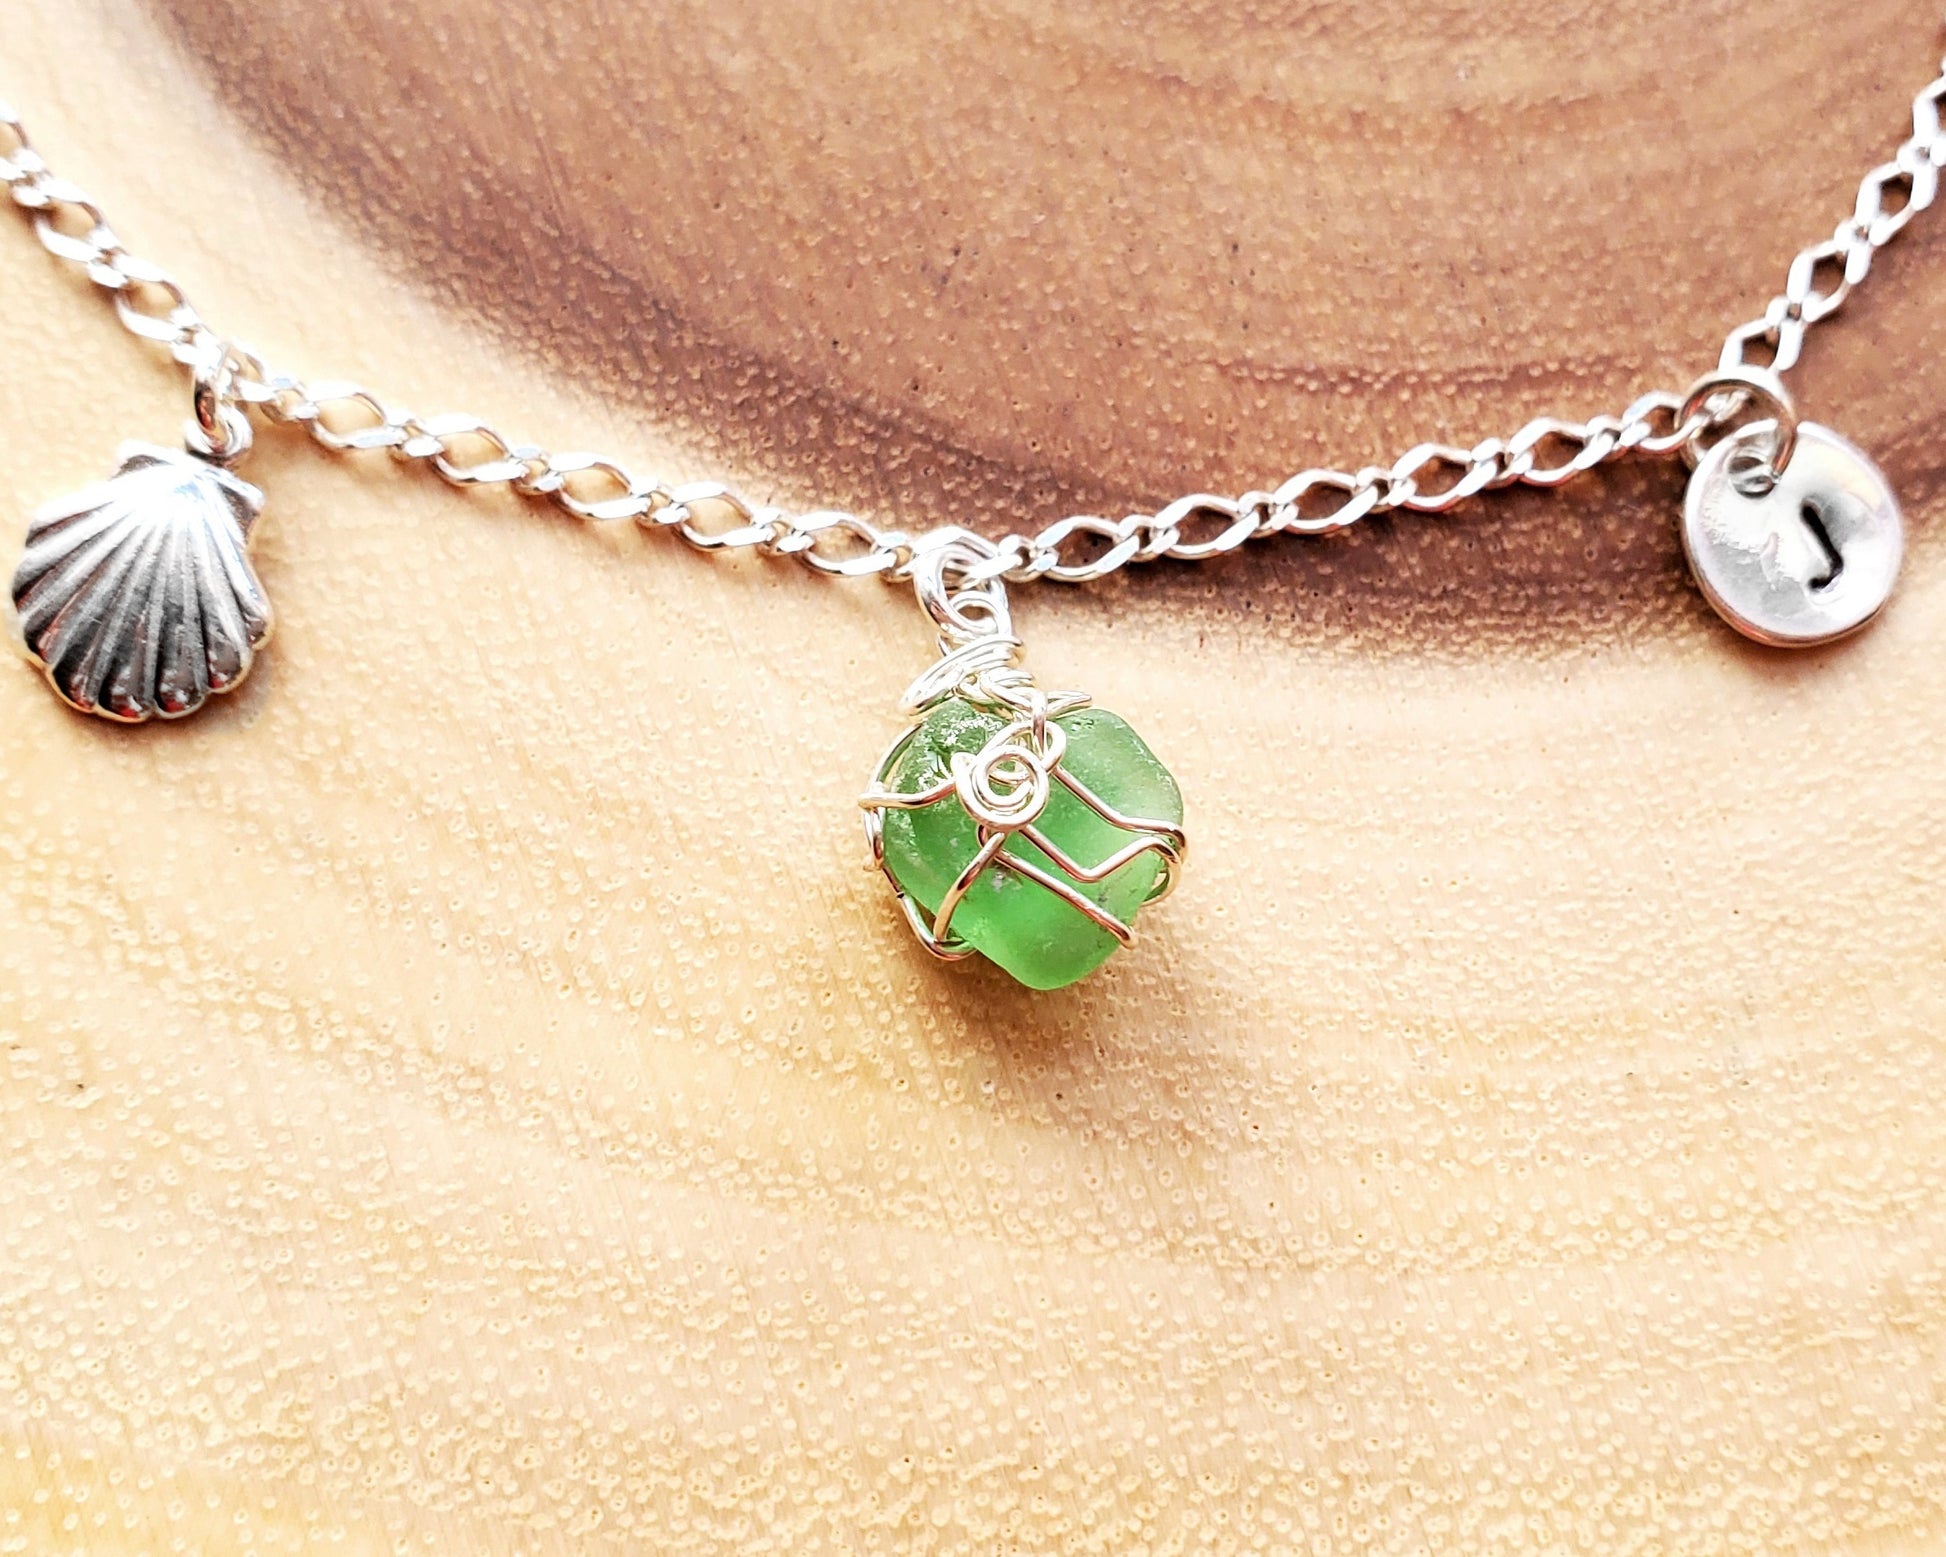 Deluxe Personalized Emerald Green Beach Glass Shell Ankle Bracelet, Anklet, wire wrapped green pendant, hand stamped initial pendant, shell pendant and Celtic eternity coil pendant on chain.